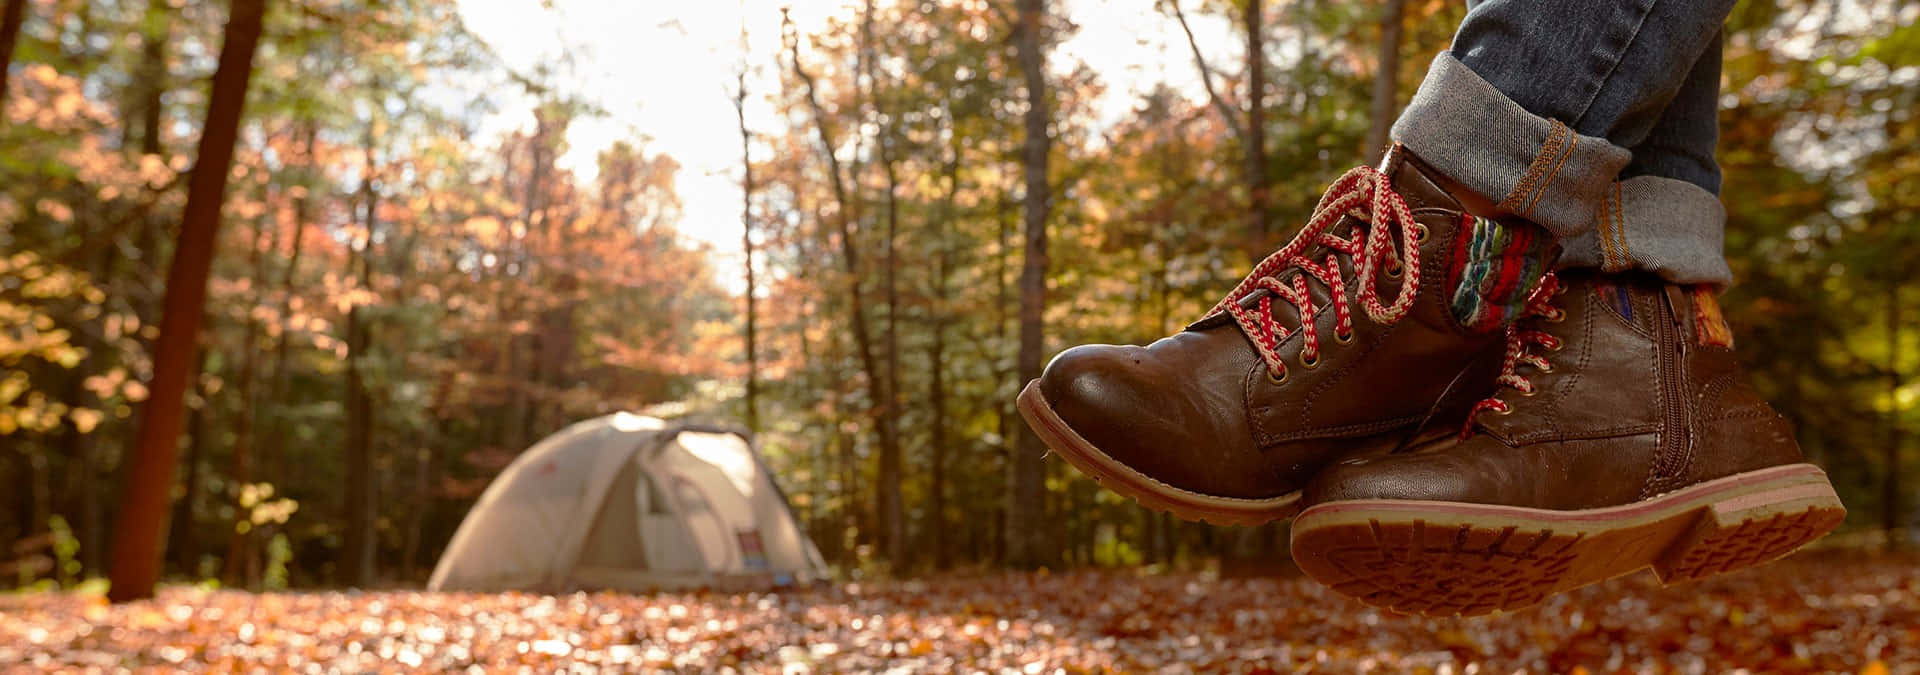 Caption: Cozy Fall Camping in a Scenic Forest Wallpaper